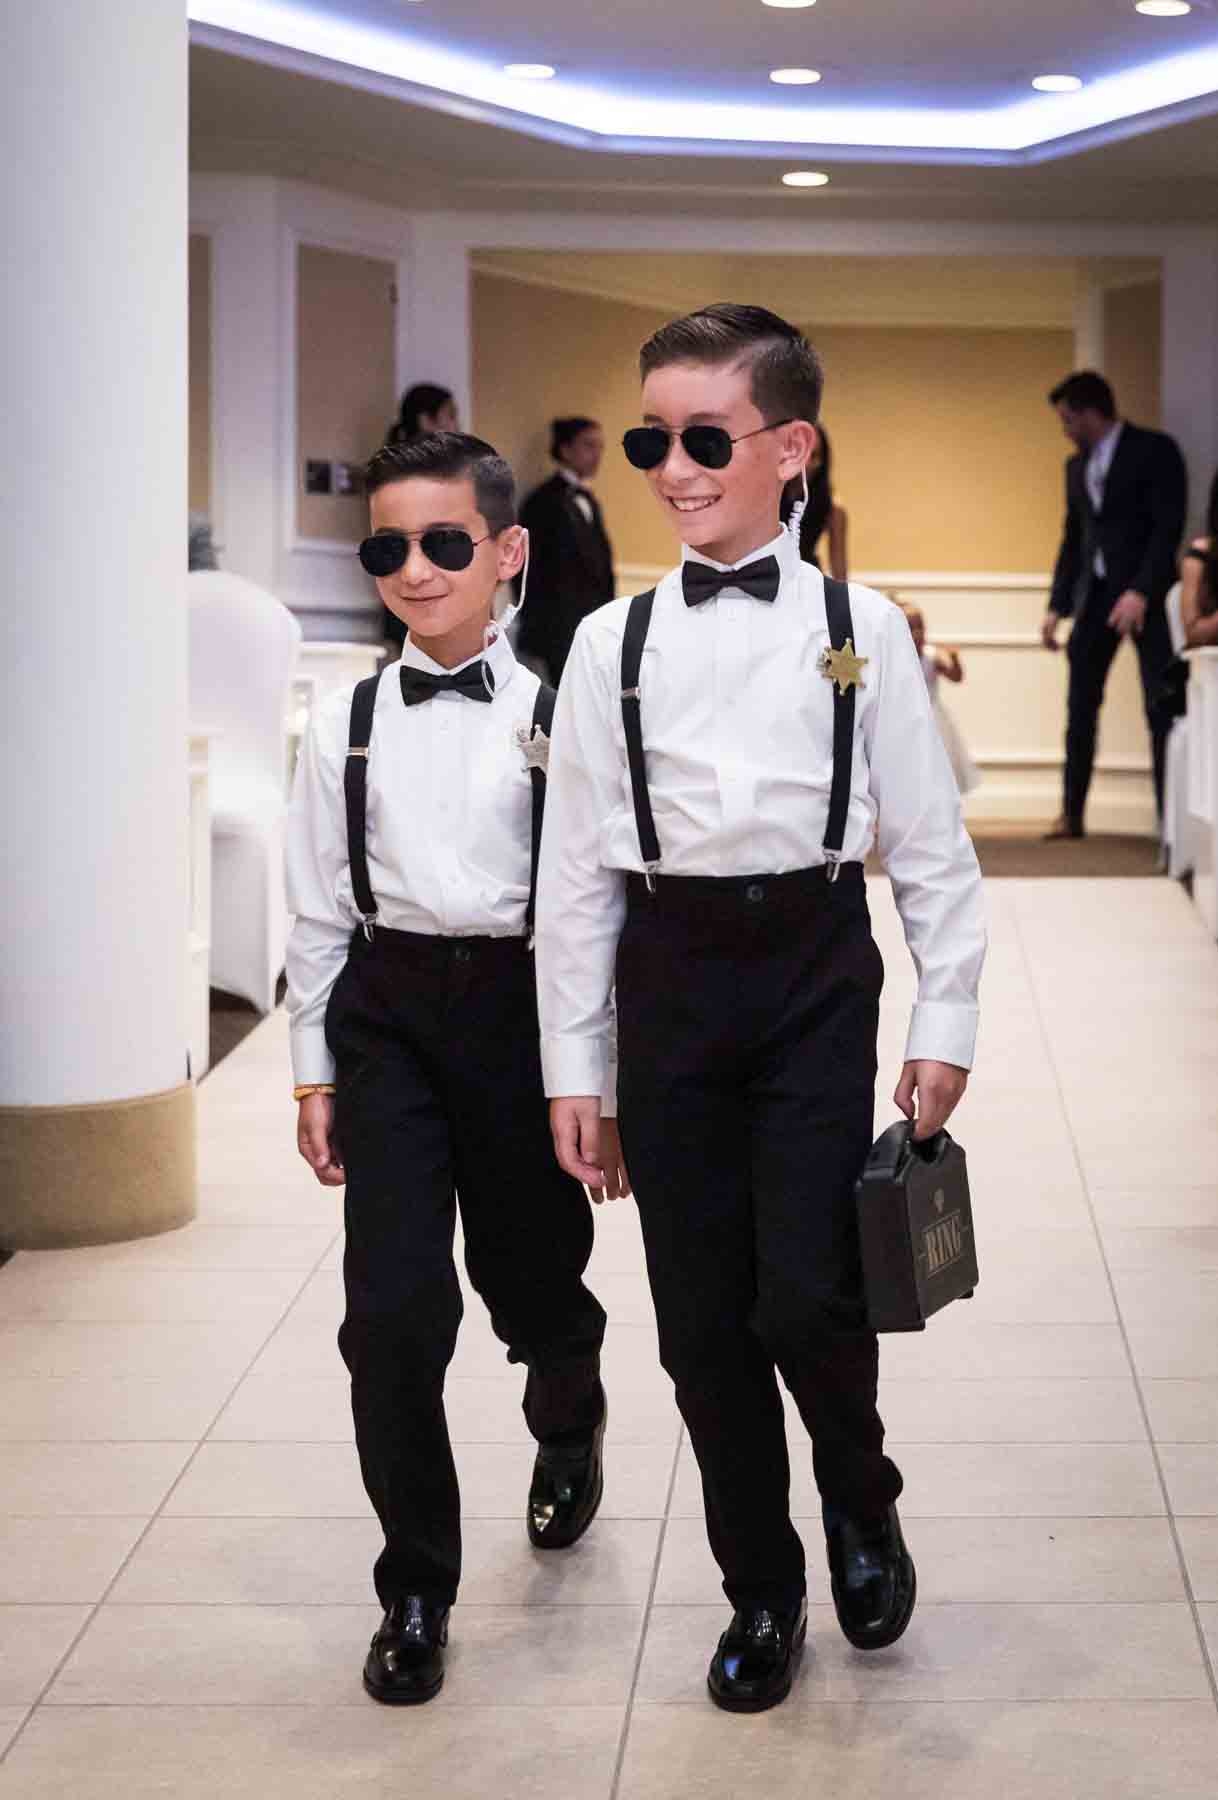 Two little boys dressed as 'ring security' during ceremony at a Terrace on the Park wedding